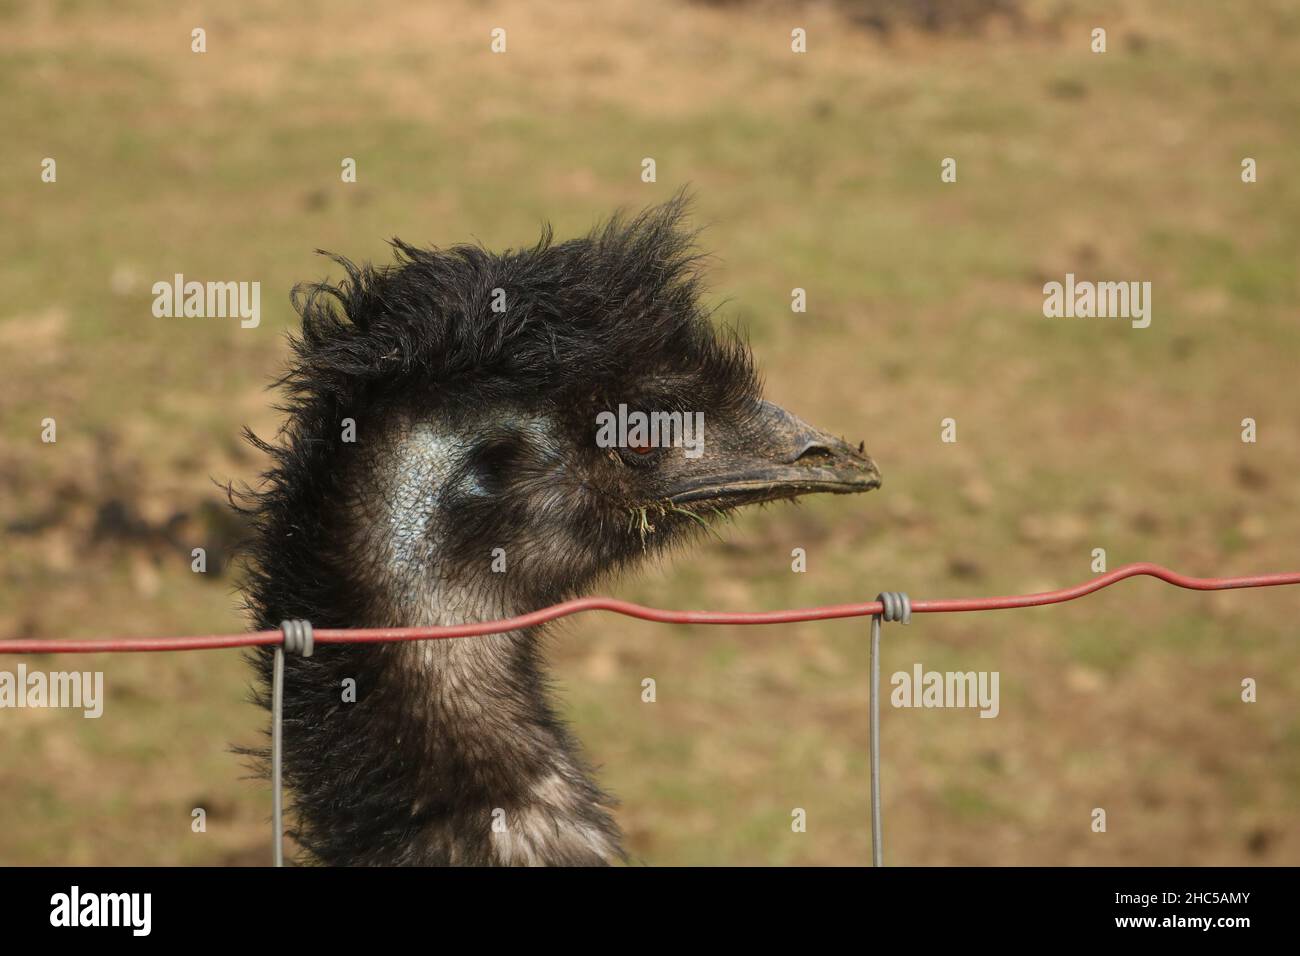 A portrait of an ostrich behind a fence Stock Photo